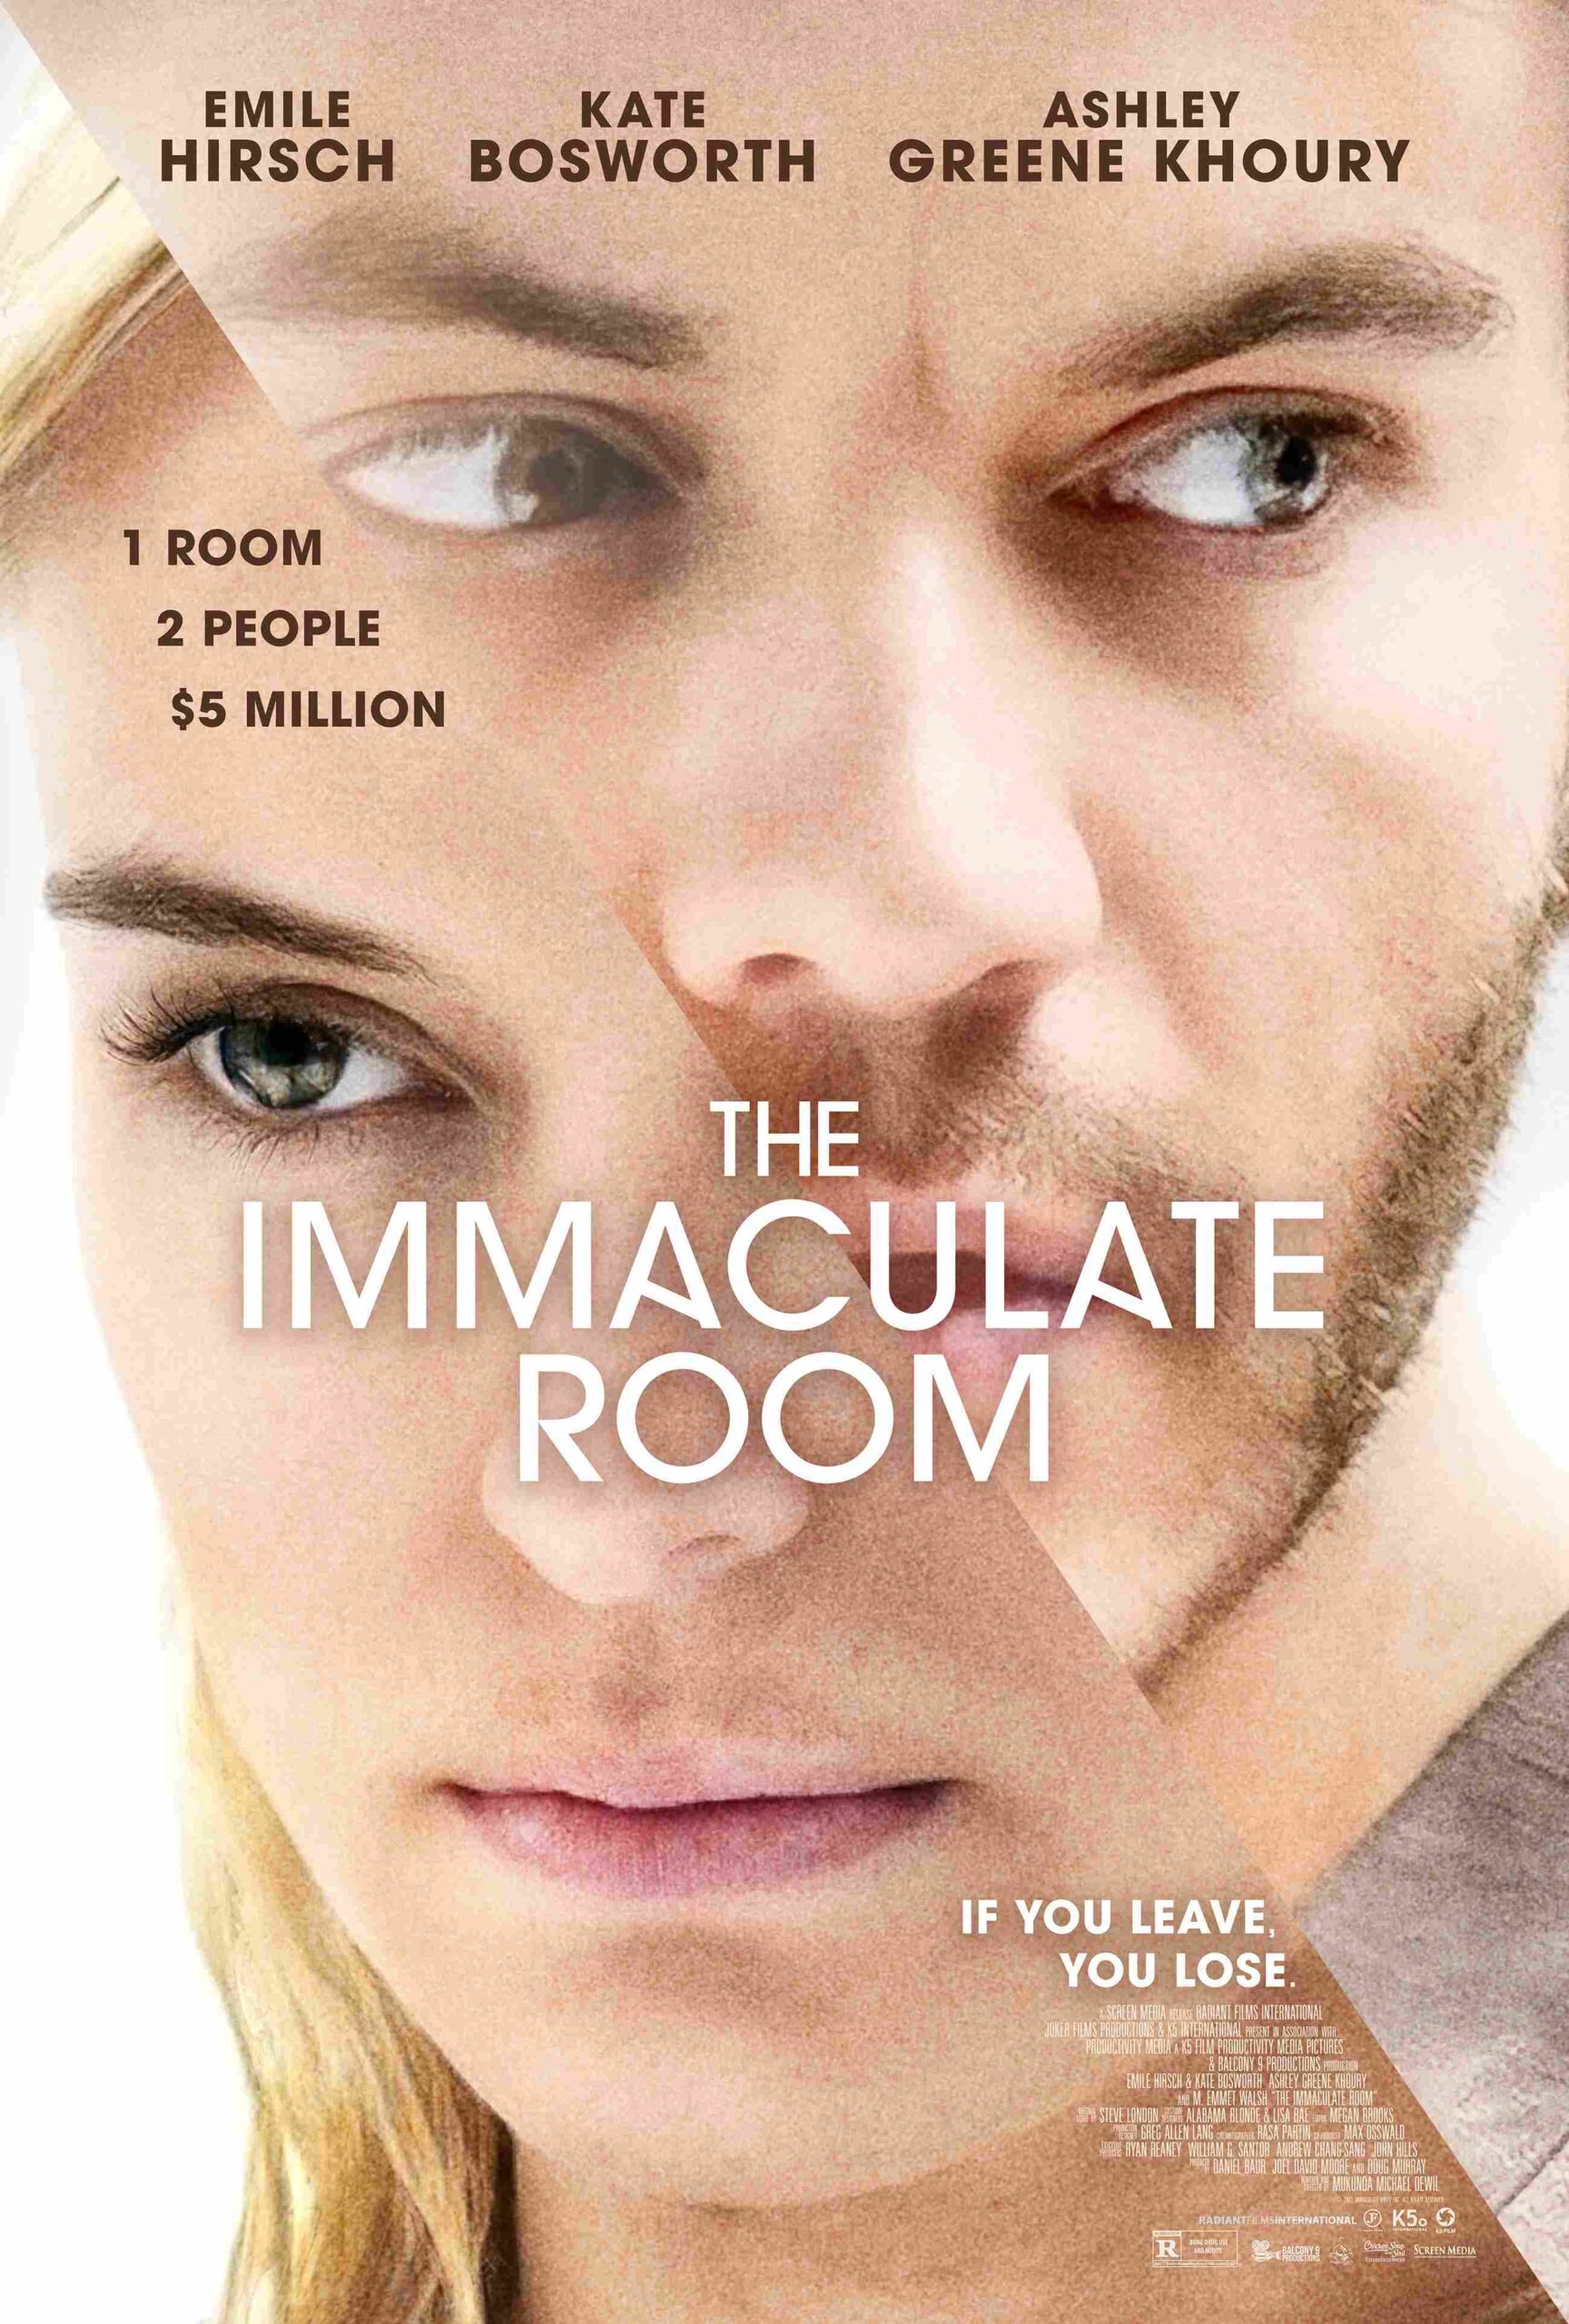 The Immaculate Room Trailer & Poster